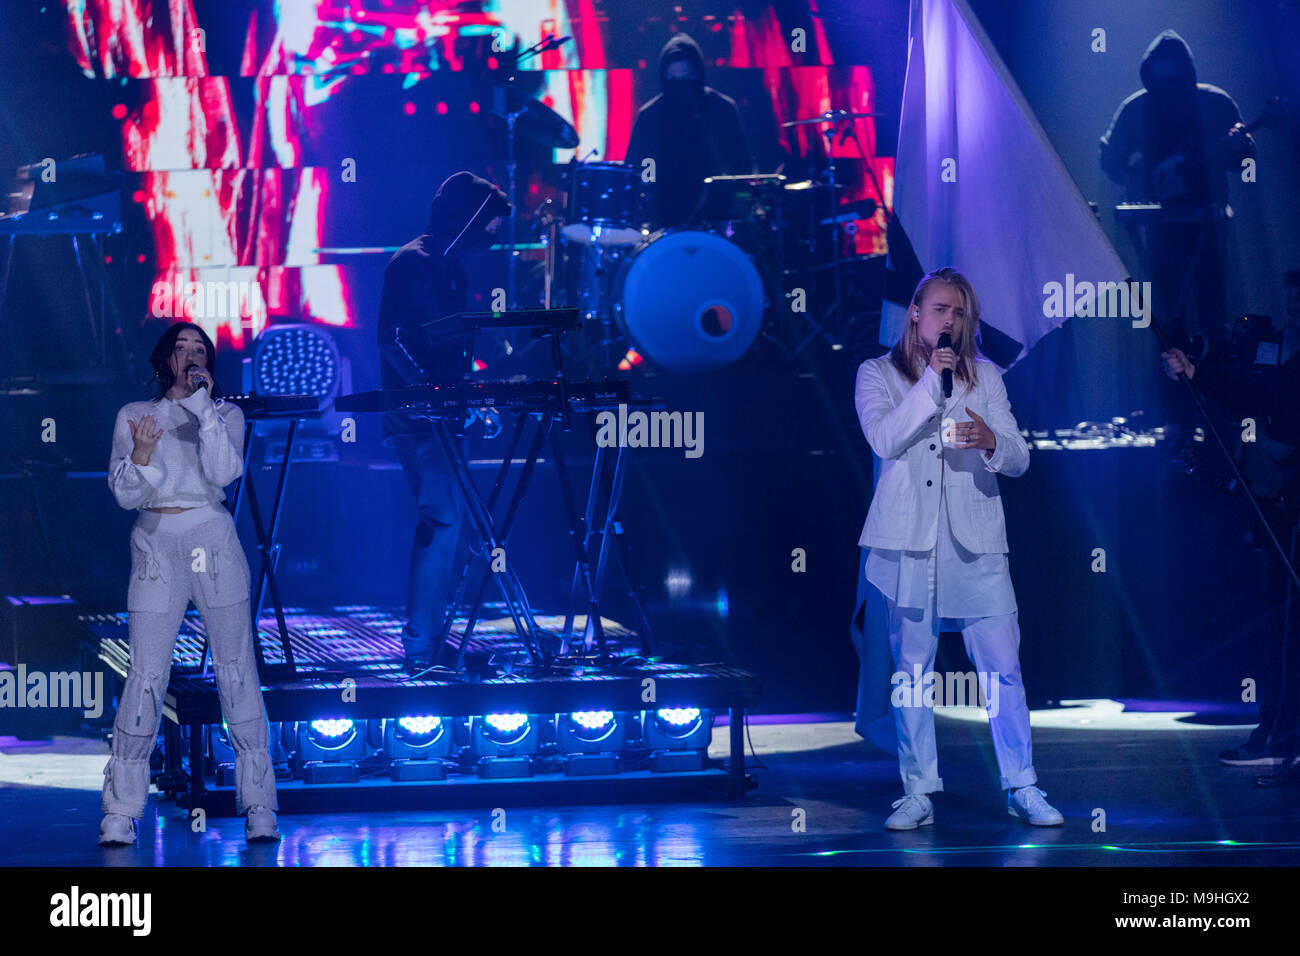 Norway, Oslo - February 25, 2018. The Norwegian DJ and record producer Alan Walker performs a live concert at Oslo Konserthus during the Norwegian Grammy Awards, Spellemannprisen 2017, in Oslo. Here the singers Noah Cyrus and Juliander make a guest appearance. (Photo credit: Gonzales Photo - Stian S. Moller). Stock Photo